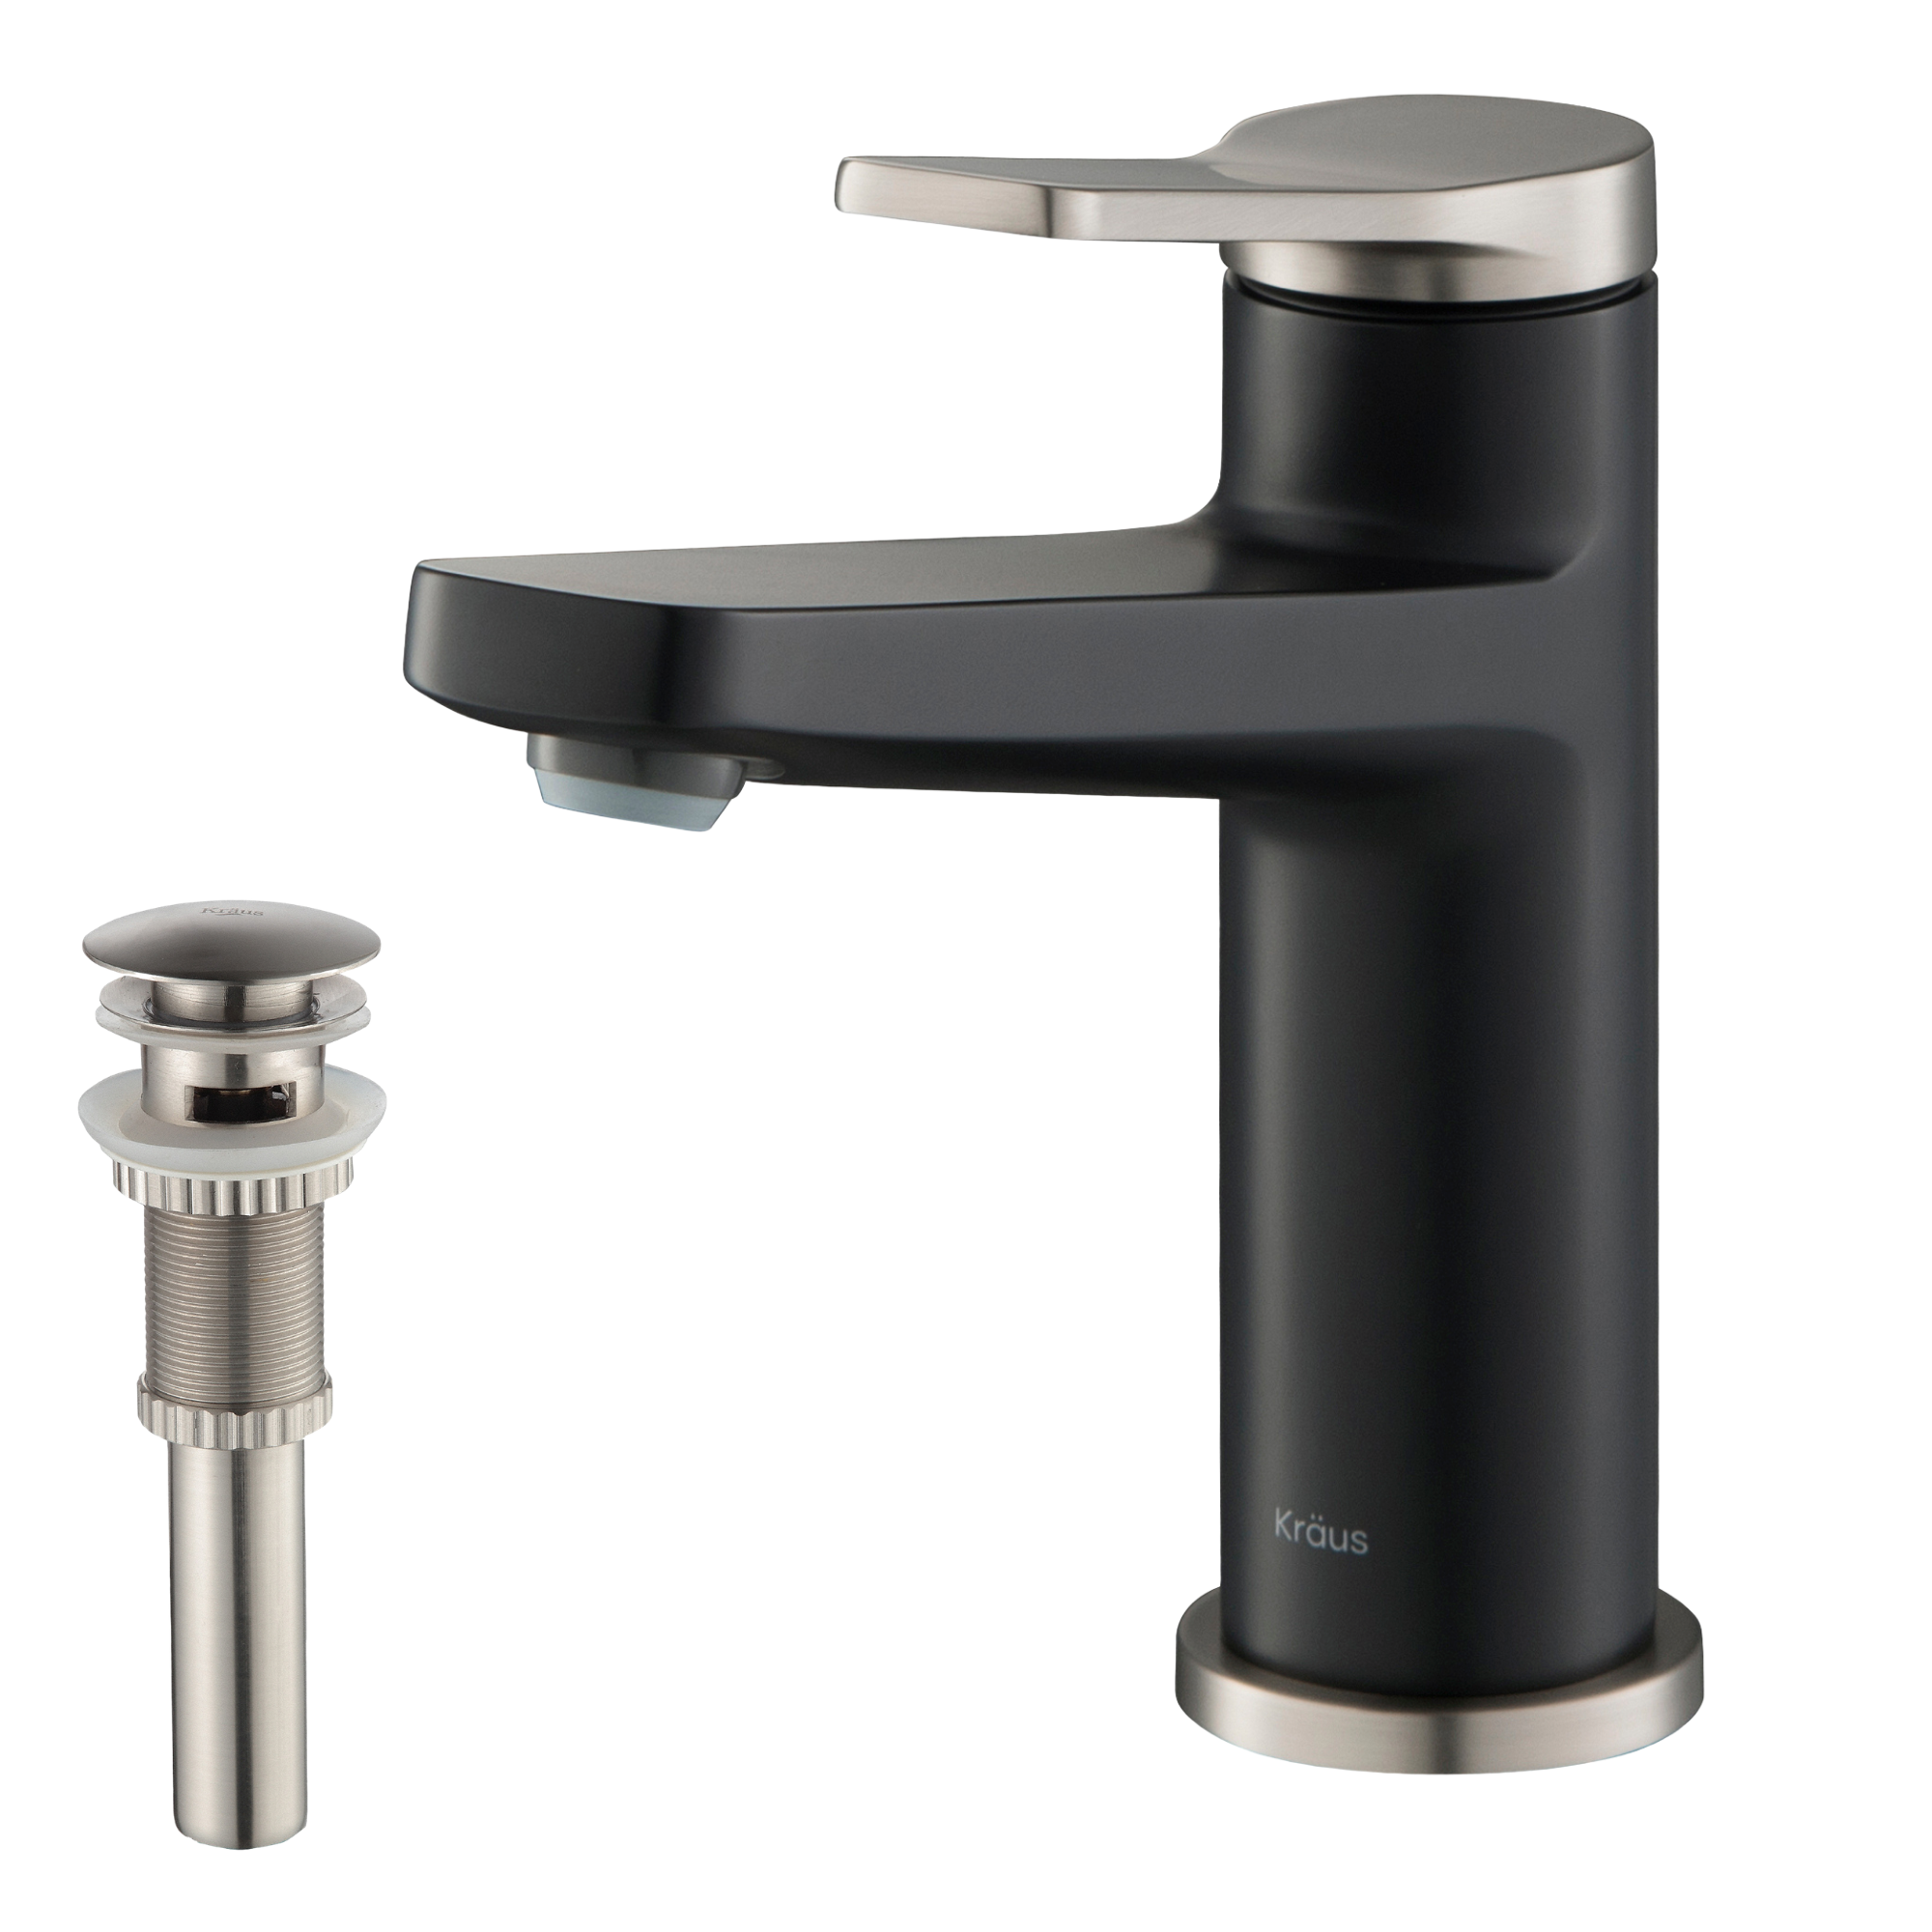 KRAUS Indy Single Handle Bathroom Faucet with Matching Pop-Up Drain in Spot Free Stainless Steel/Matte Black/Satin Nickel